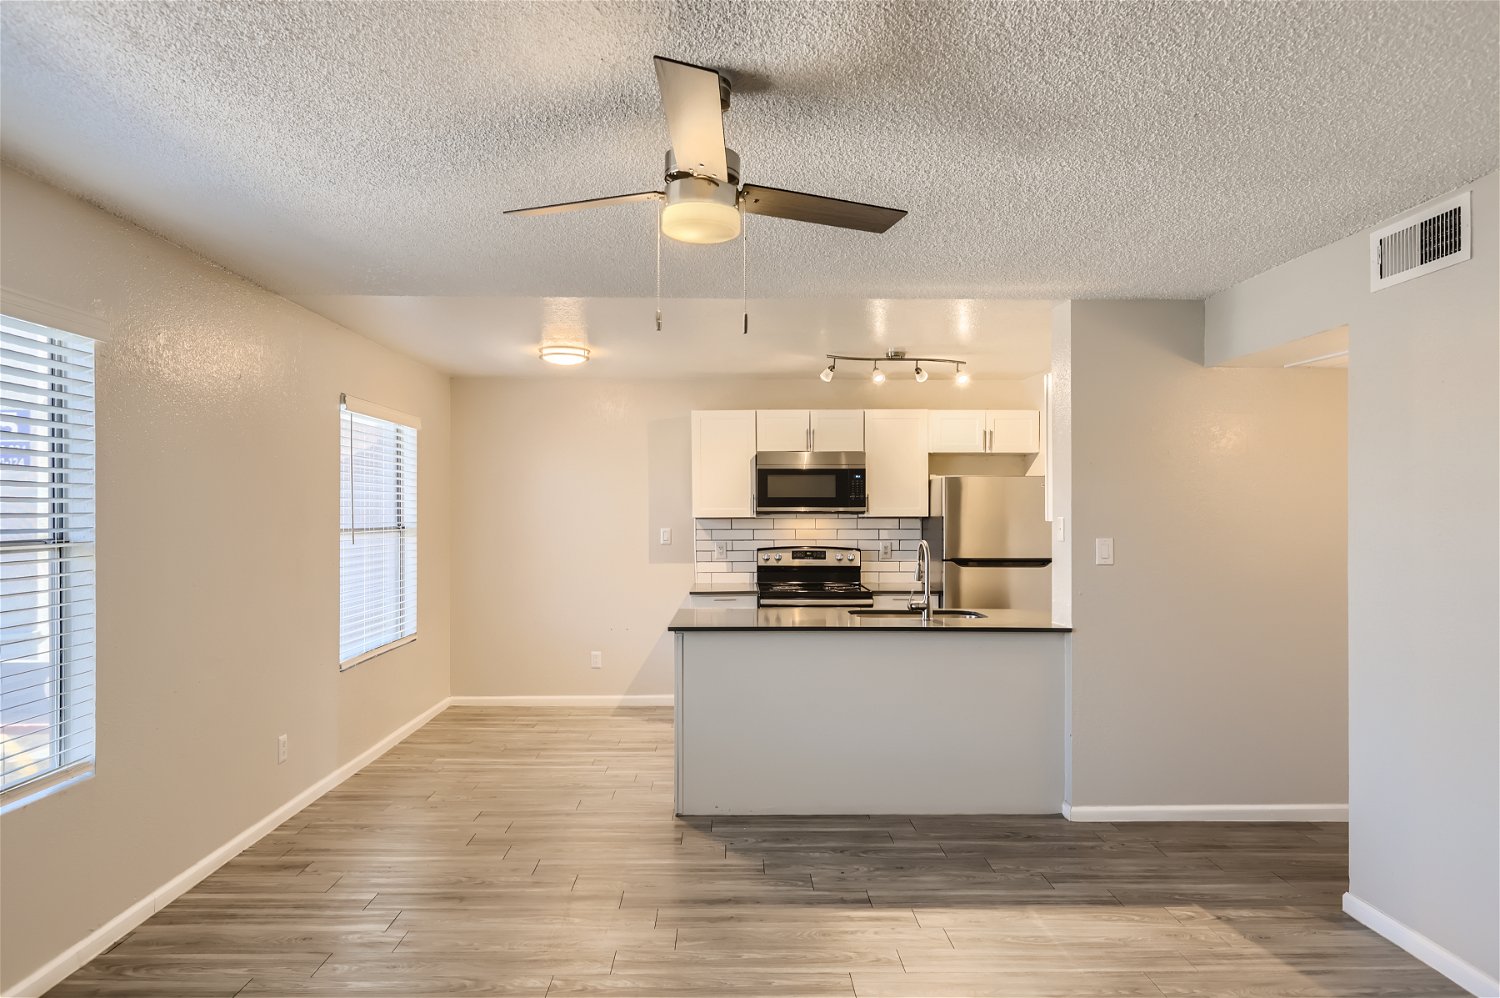 The living area with a kitchen and wood-style floors at Rise Trailside. 